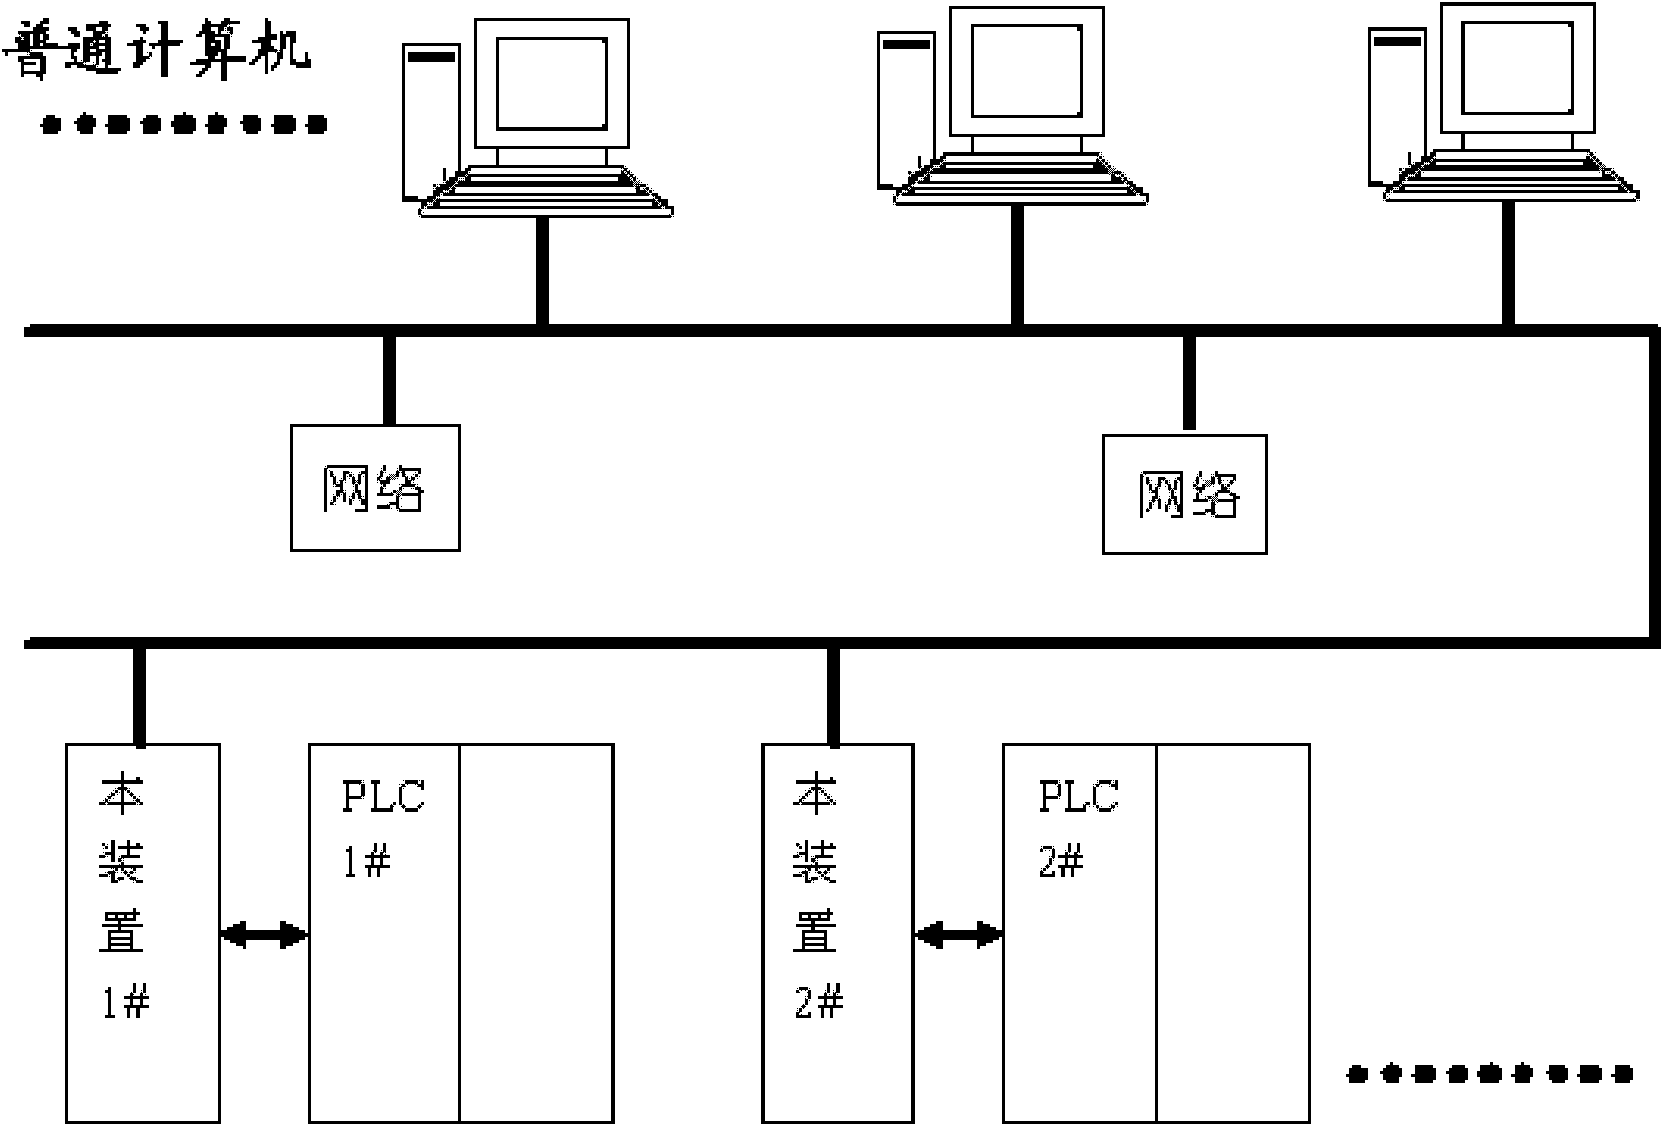 Information publish device of production line equipment controlled by programmable logic controller (PLC) based on hypertext markup language (HTML)